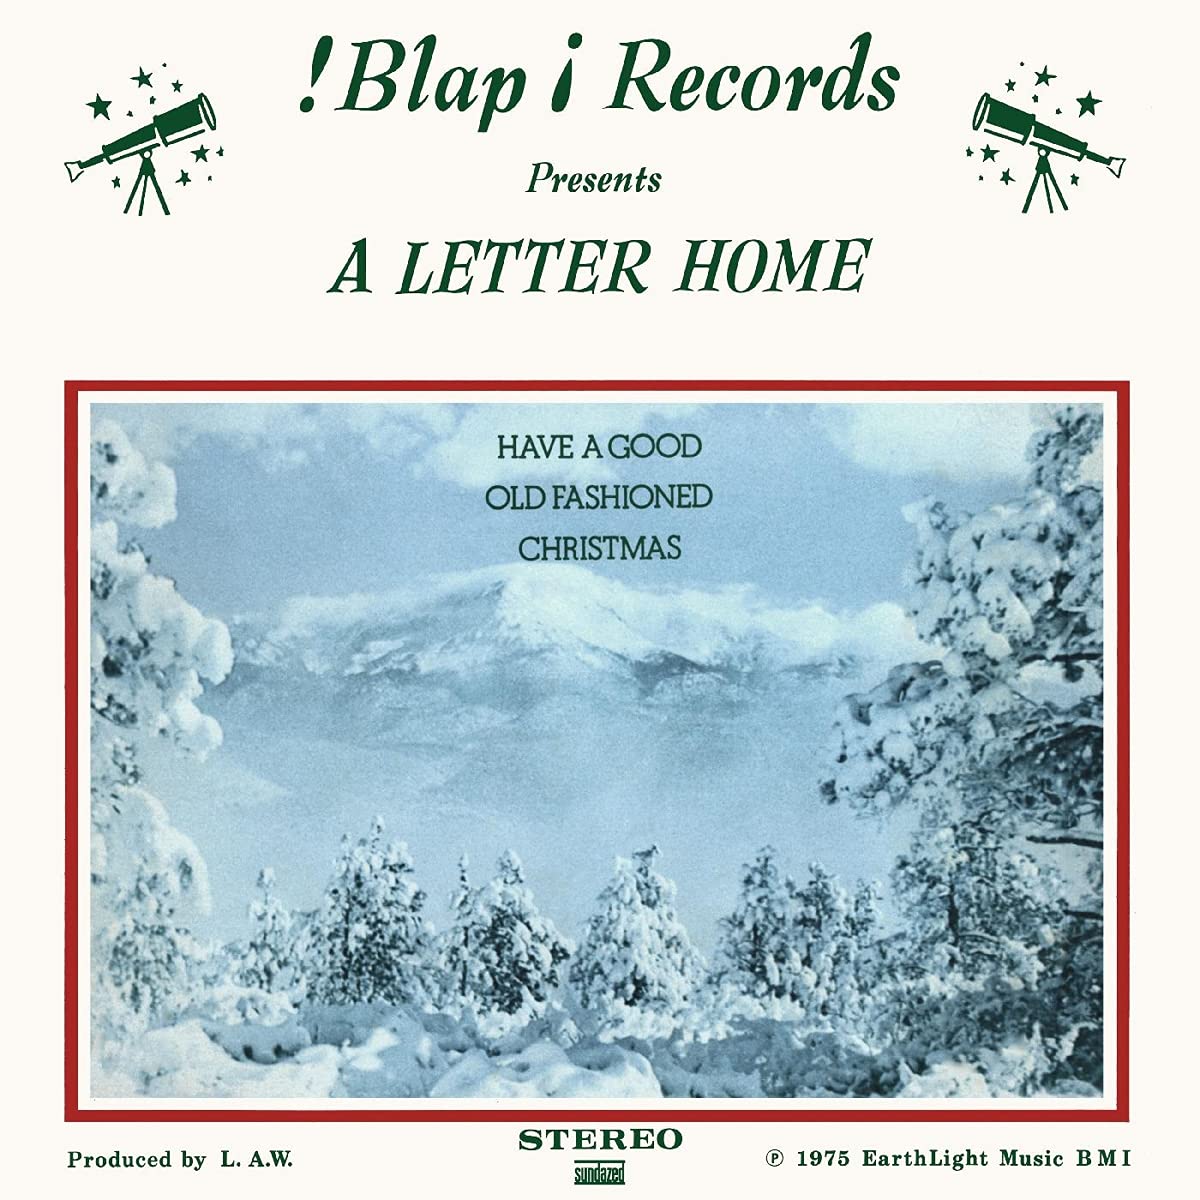 Have a Good Old Fashioned Christmas [Vinyl LP]